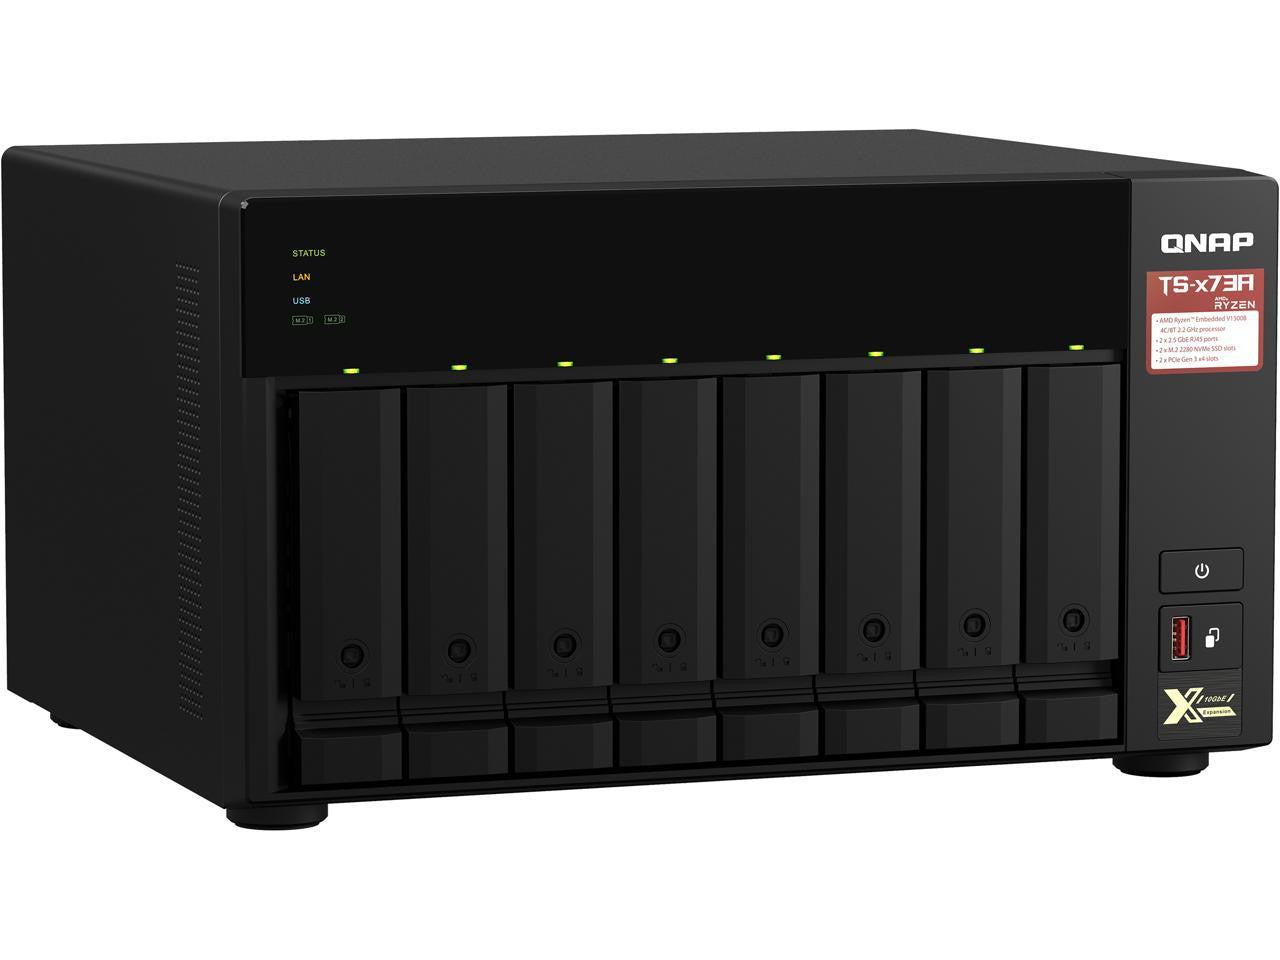 QNAP TS-873A 8-BAY NAS with 8GB DDR4 RAM and 24TB (8x3TB) Seagate Ironwolf NAS Drives Fully Assembled and Tested